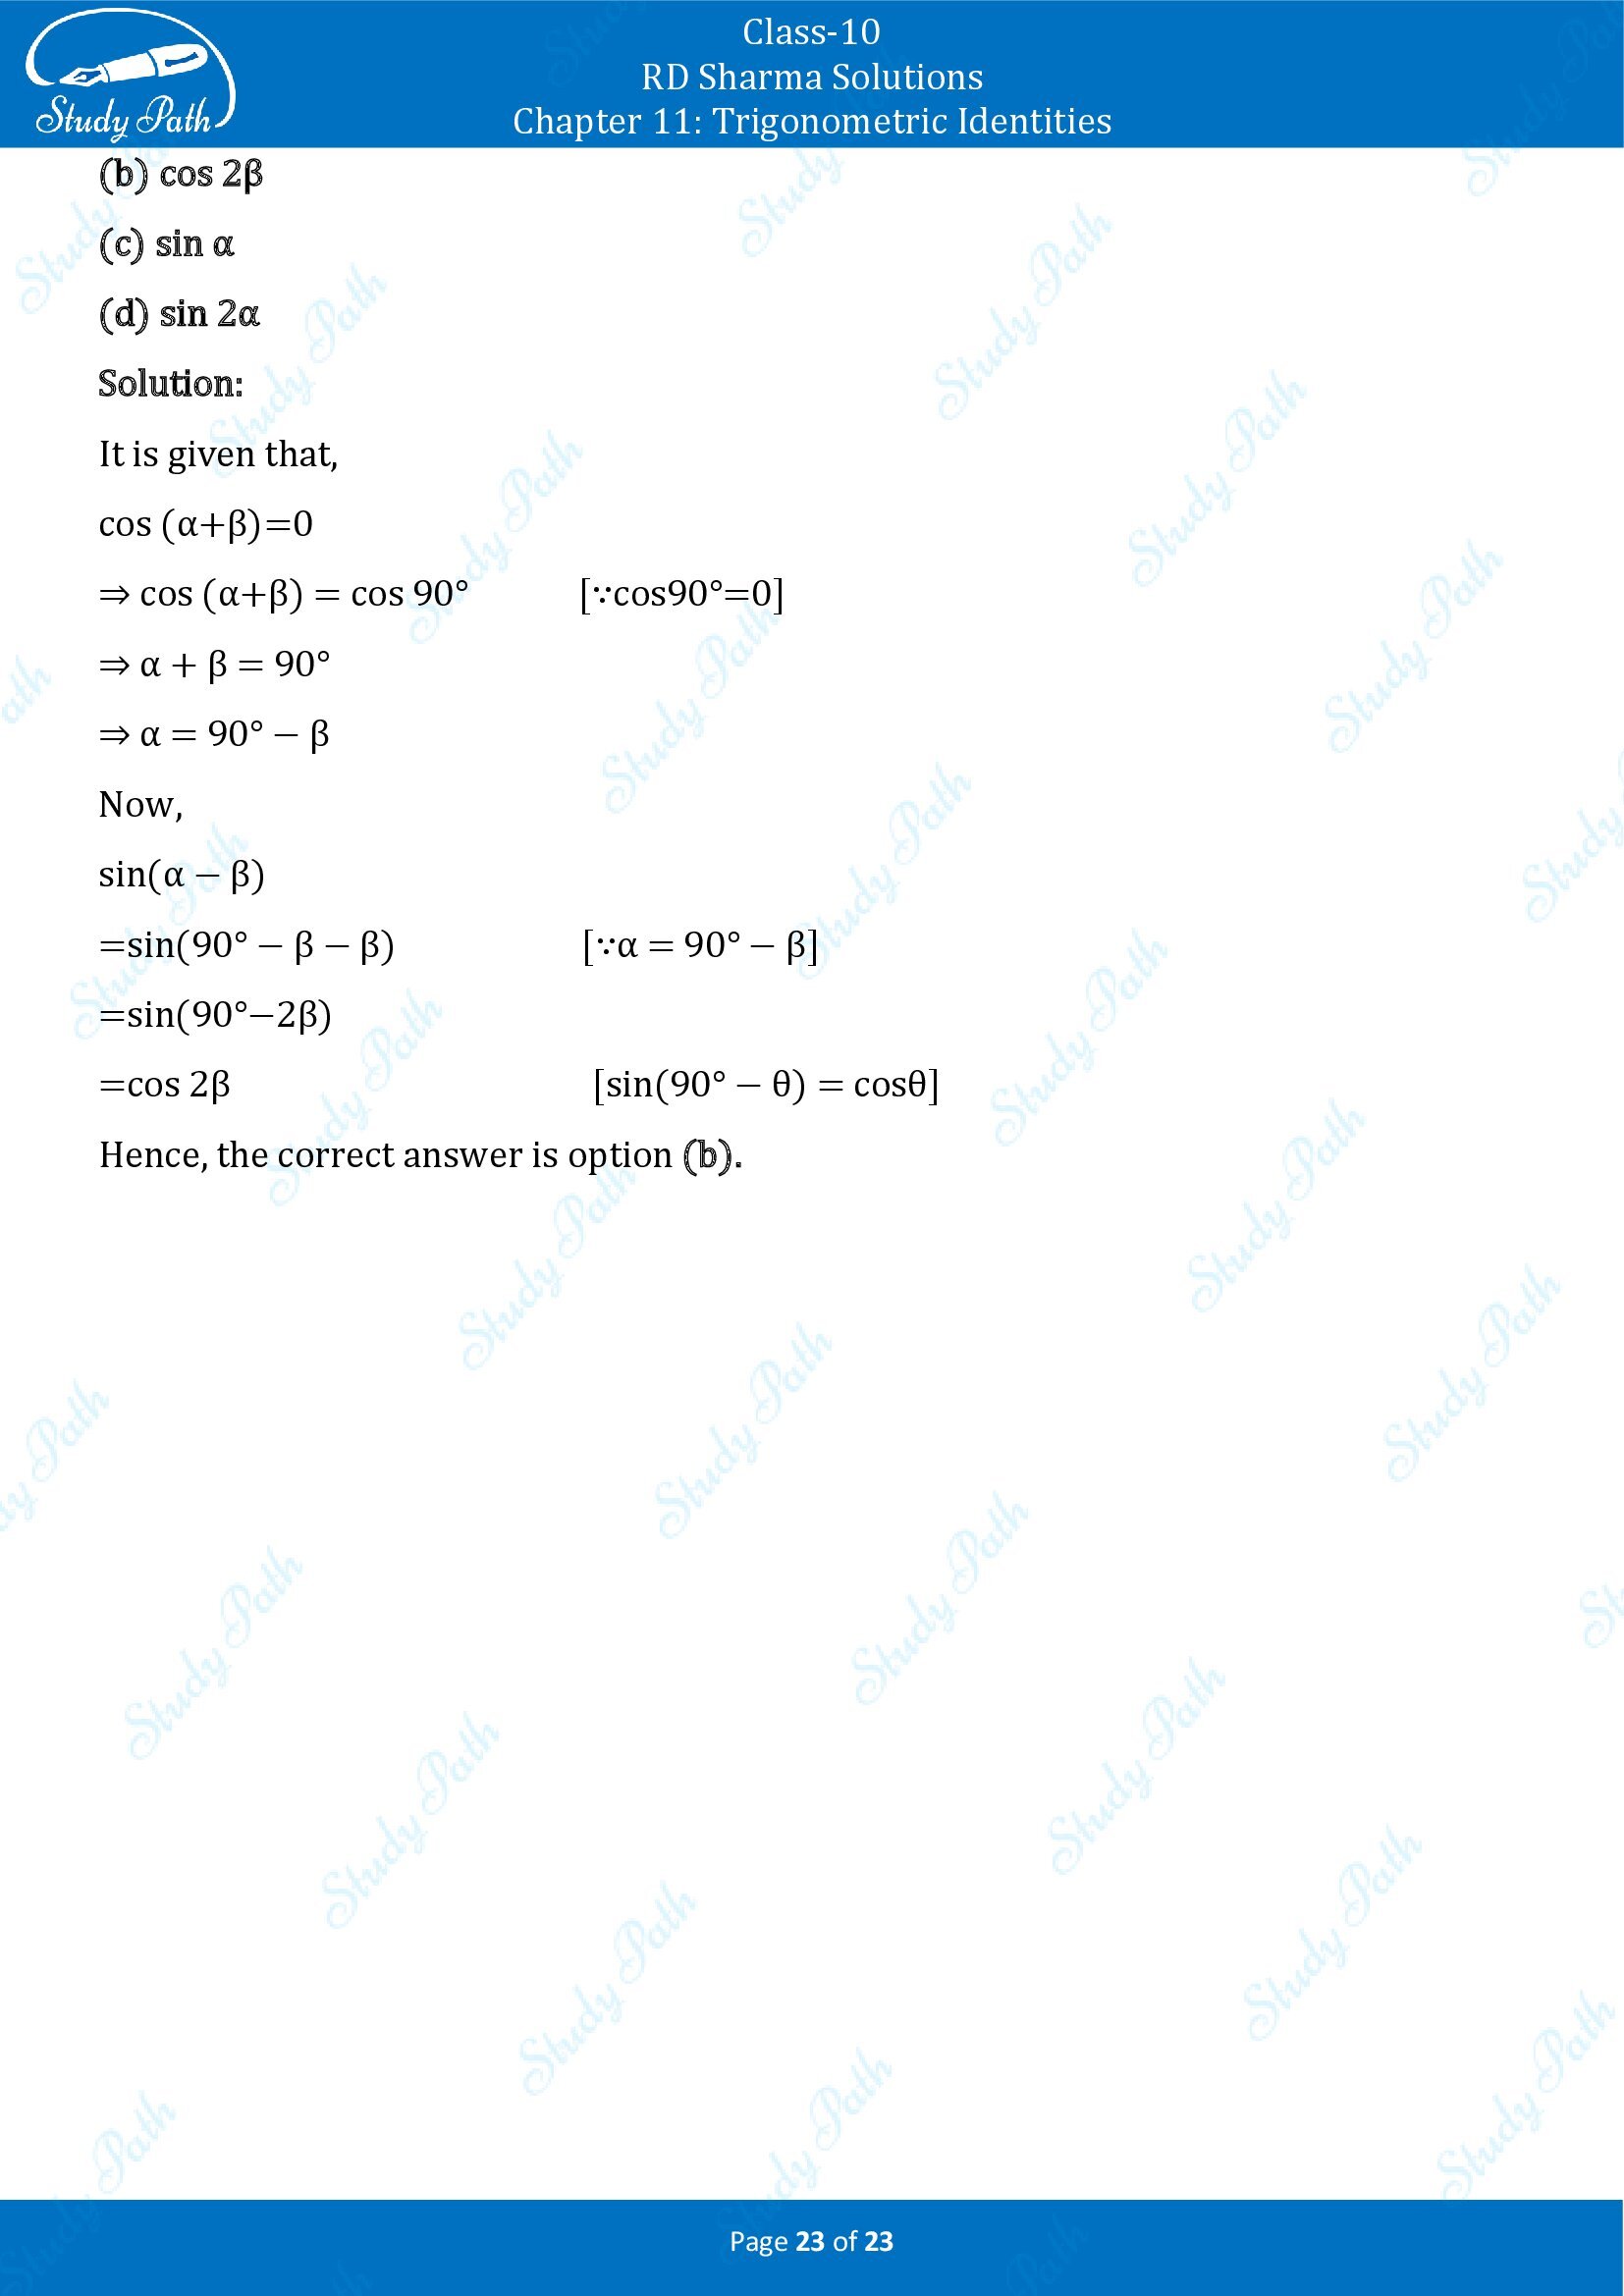 RD Sharma Solutions Class 10 Chapter 11 Trigonometric Identities Multiple Choice Questions MCQs 00023